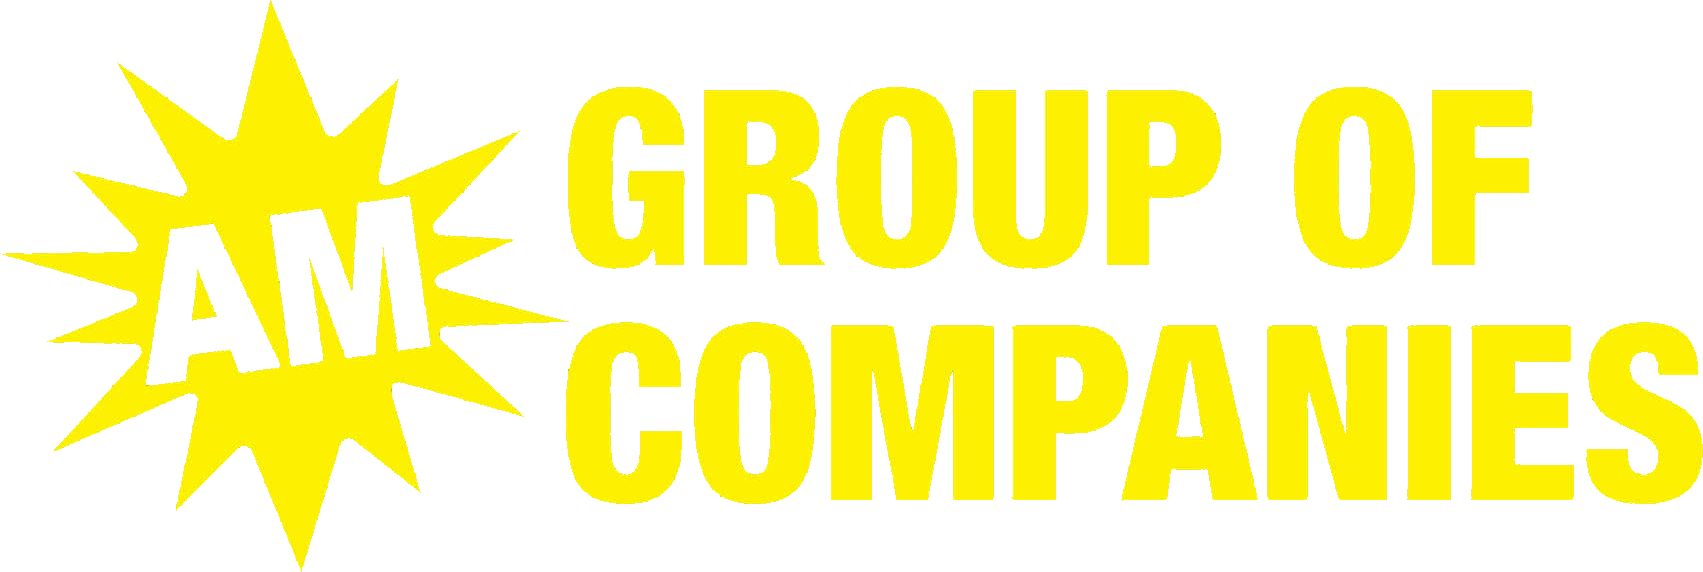 AMGROUP